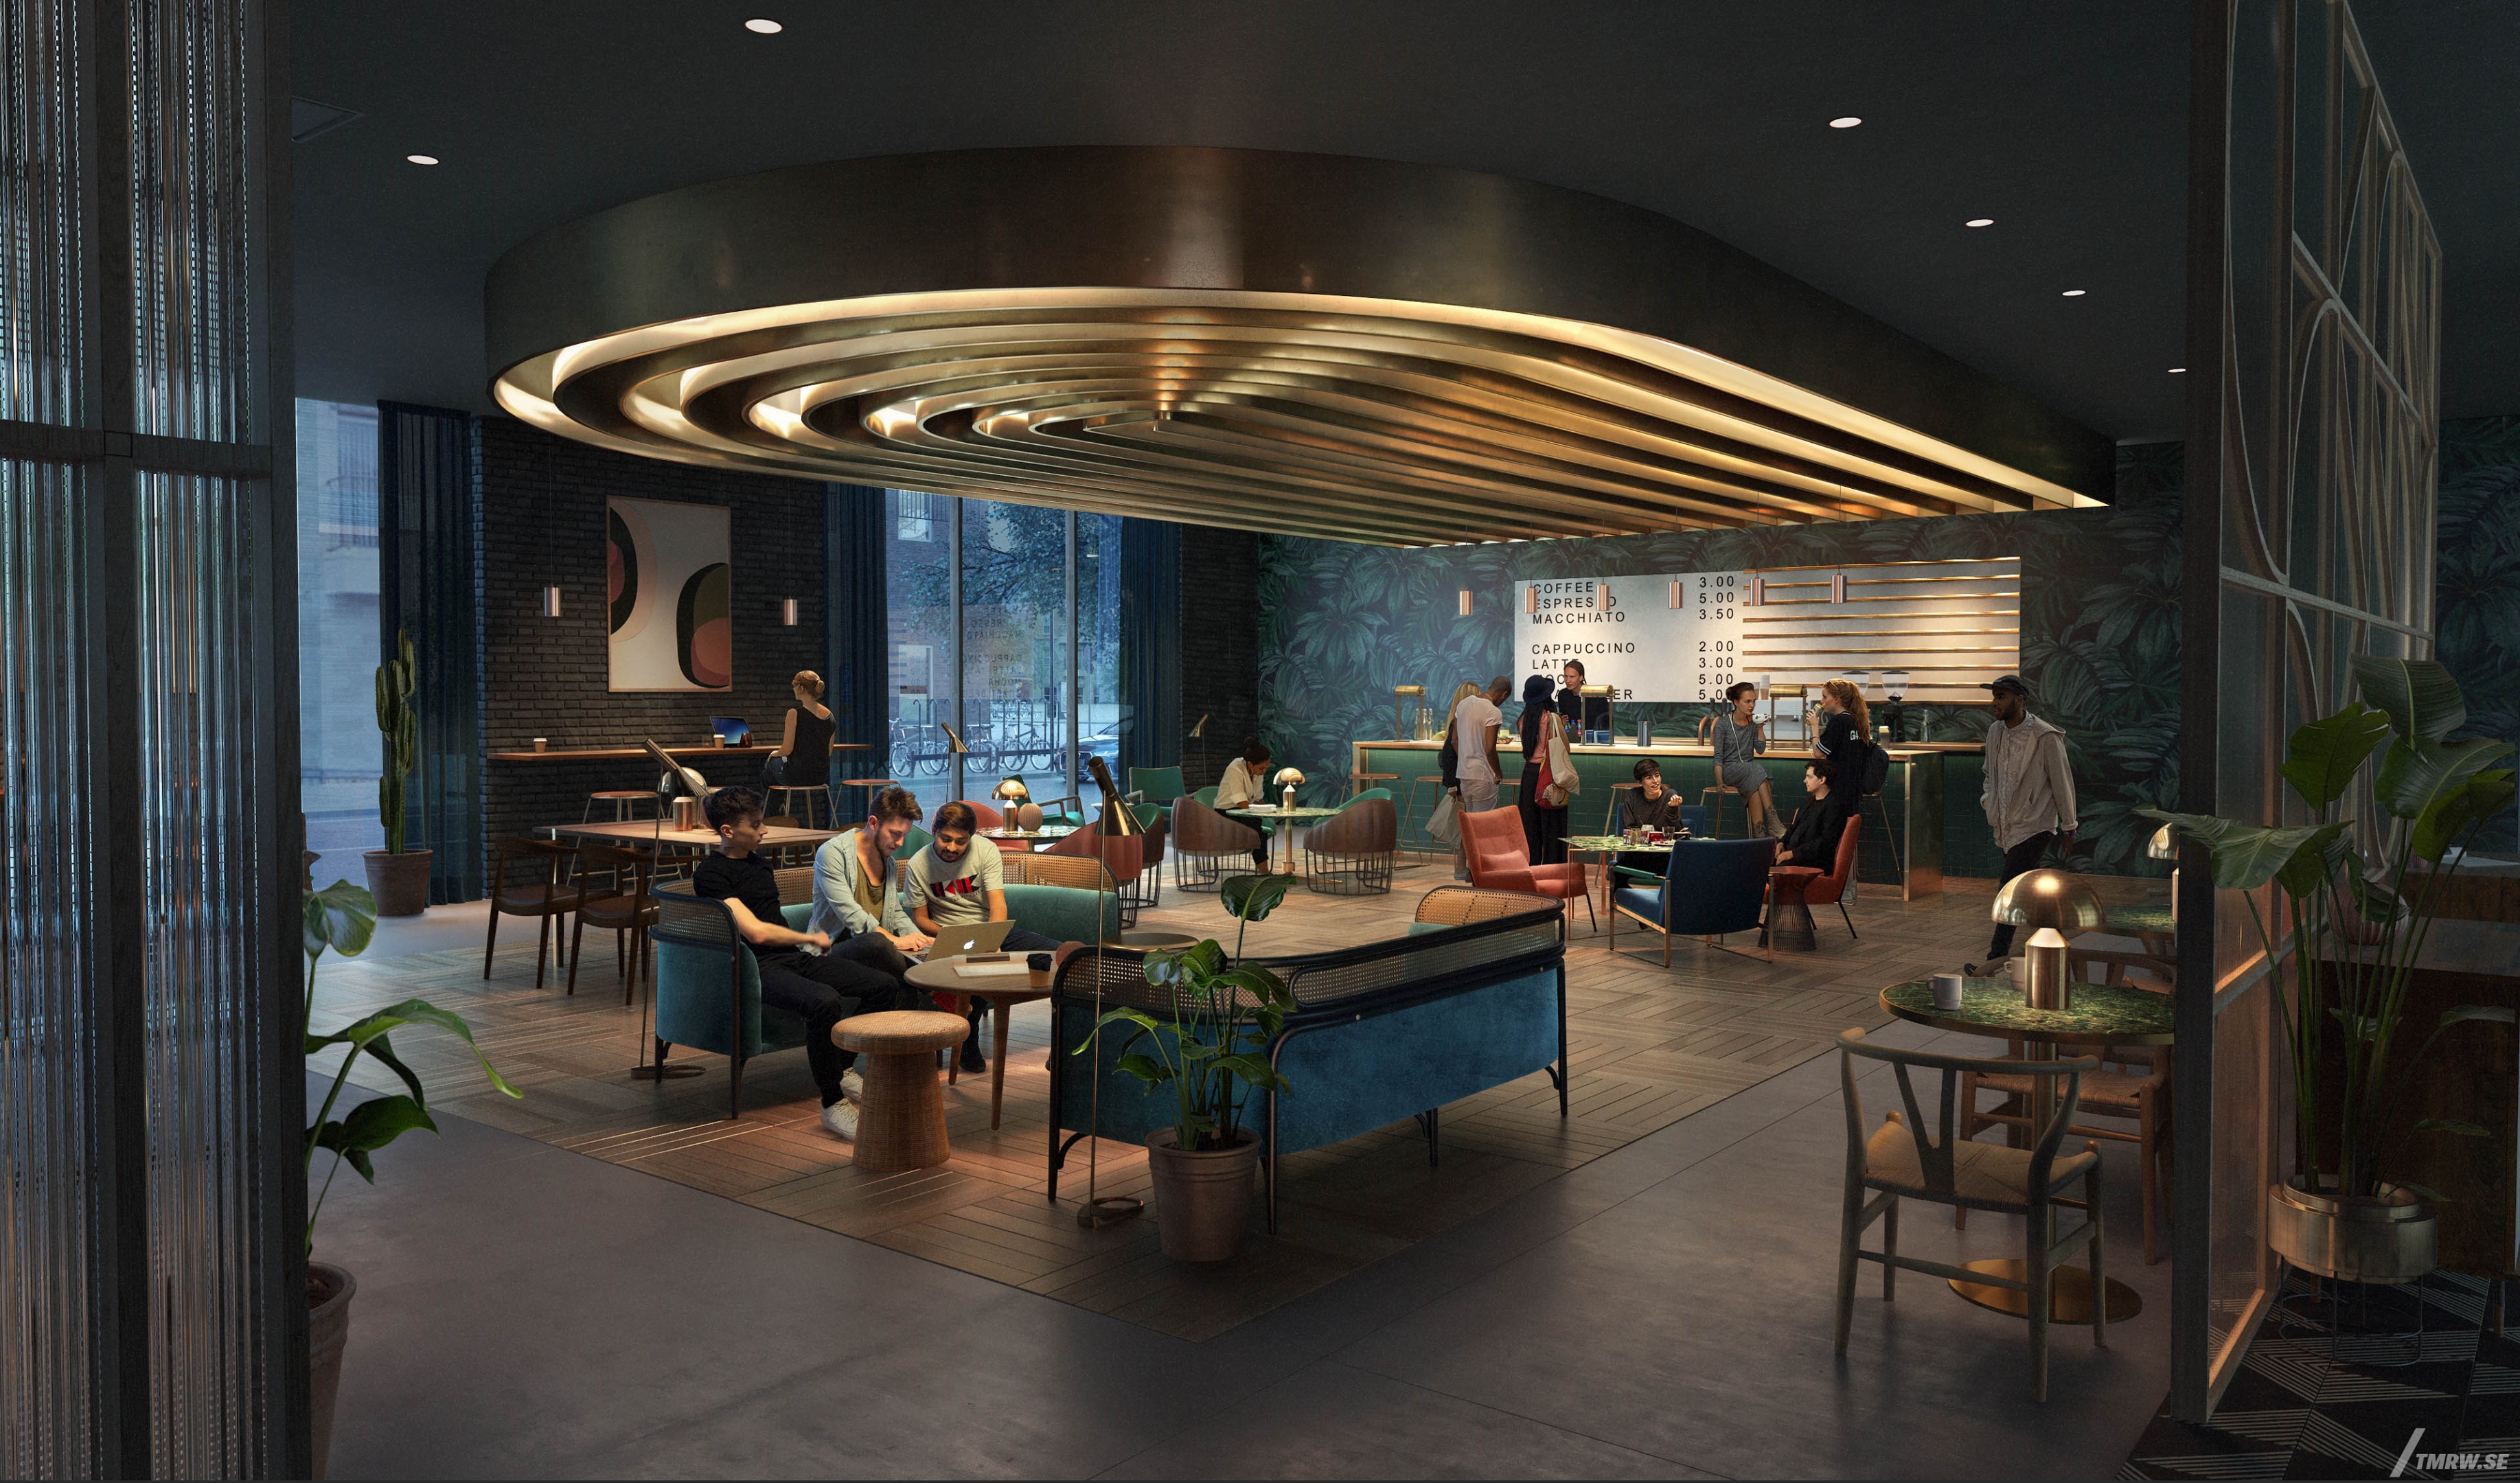 Architectural visualization of Multi Family for Gensler, an restaurant area in dusk light from an interior view.